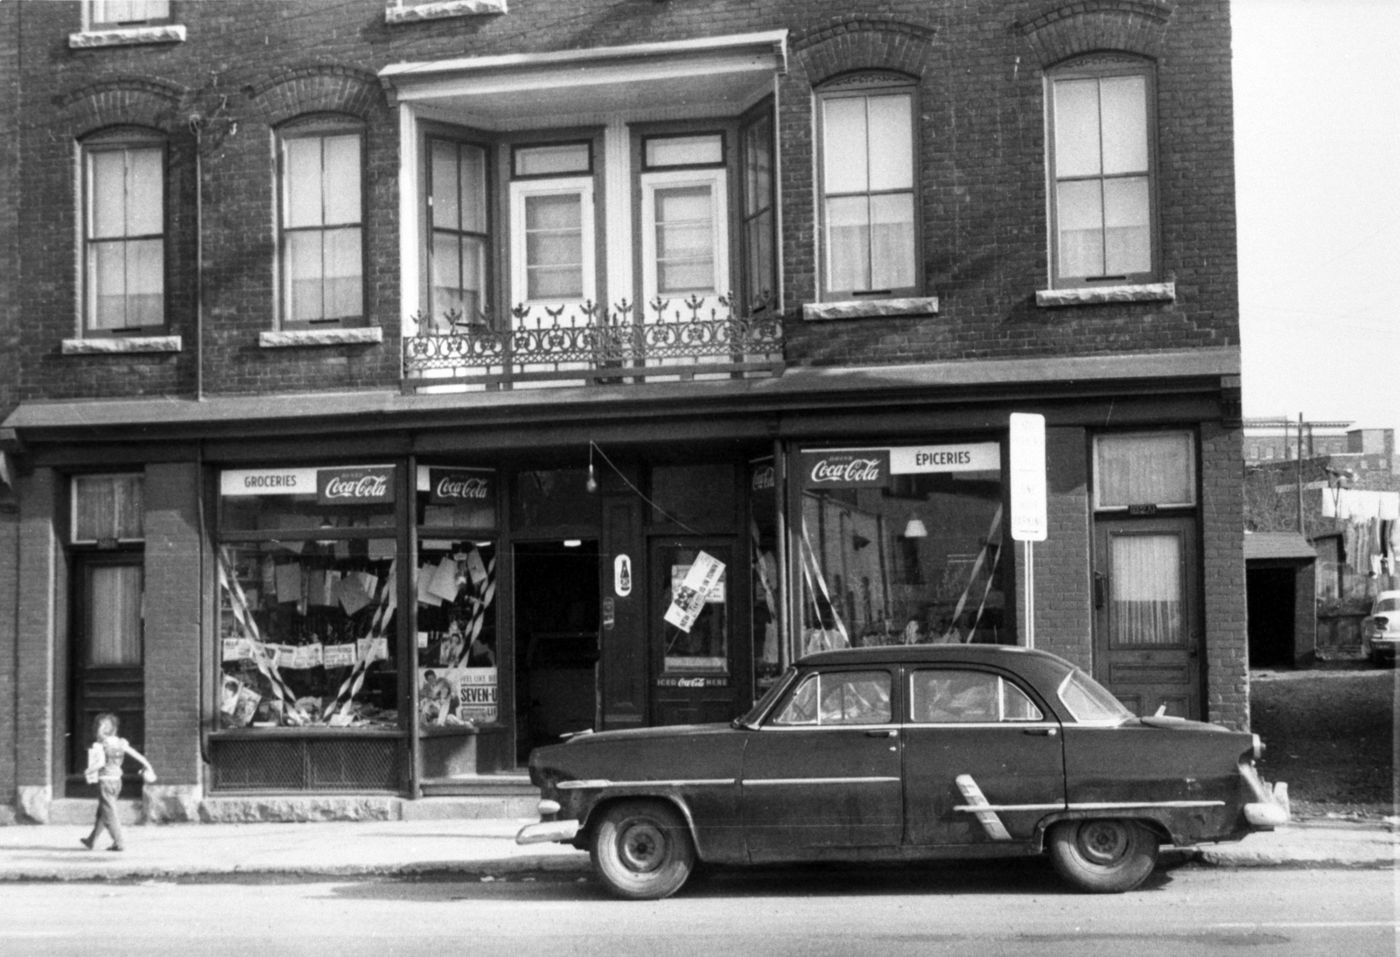 Black and white photograph of a young boy walking in front of a multi-storey brick house, with a grocery store on the ground floor. The signs are bilingual. A car is parked in front of the shop.